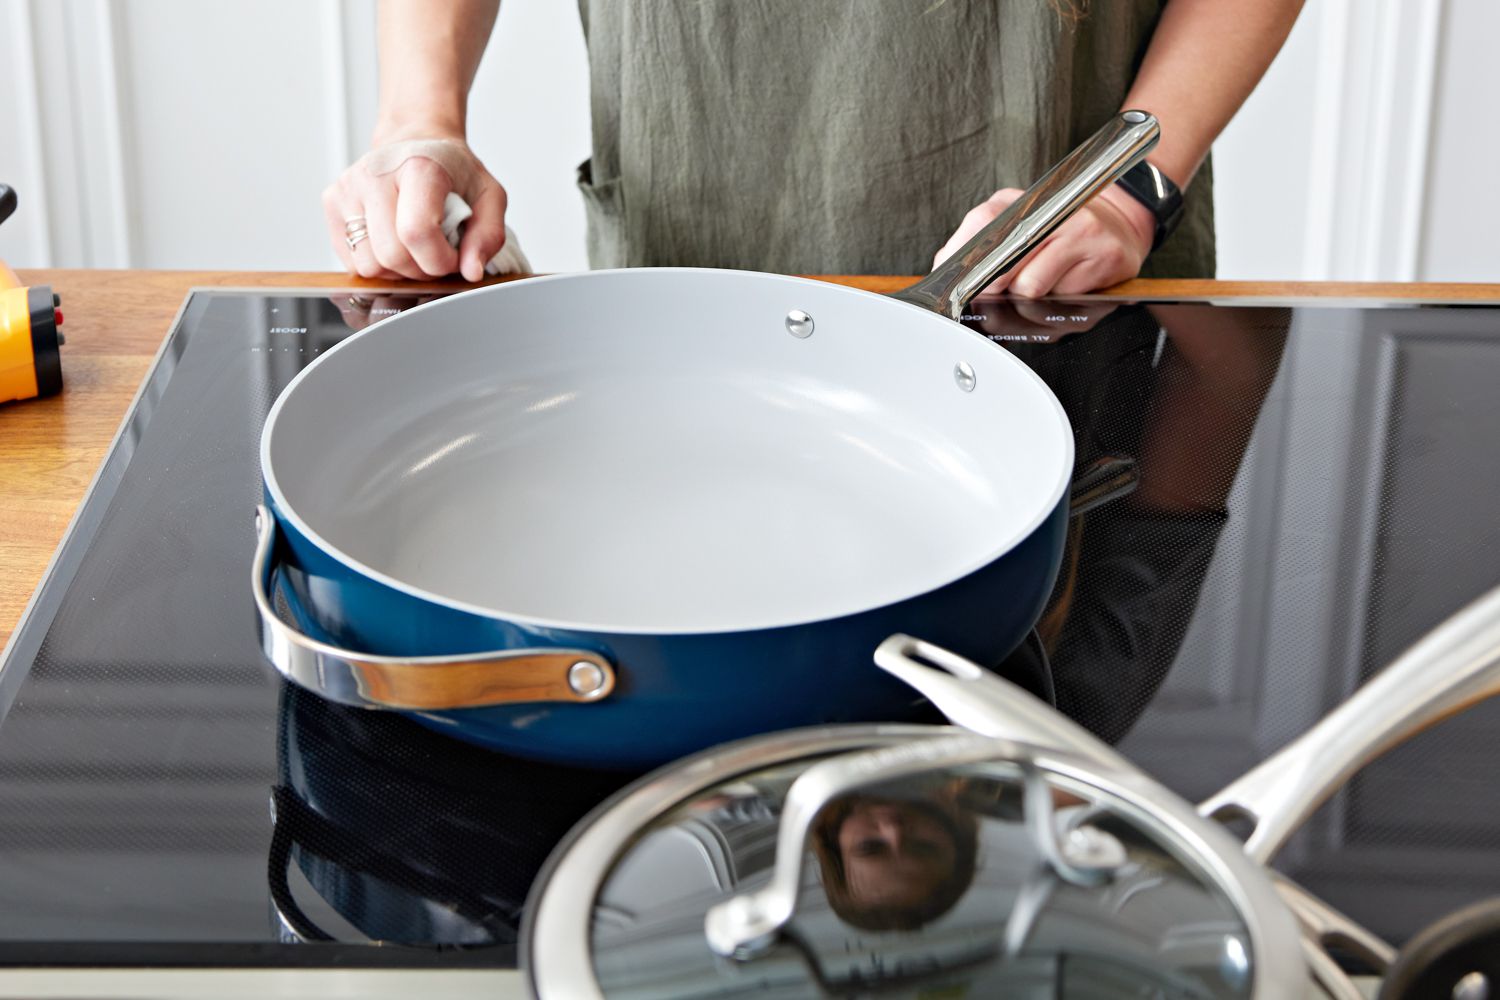 Person standing behind a Caraway Cookware Set saute pan displayed on glass stovetop